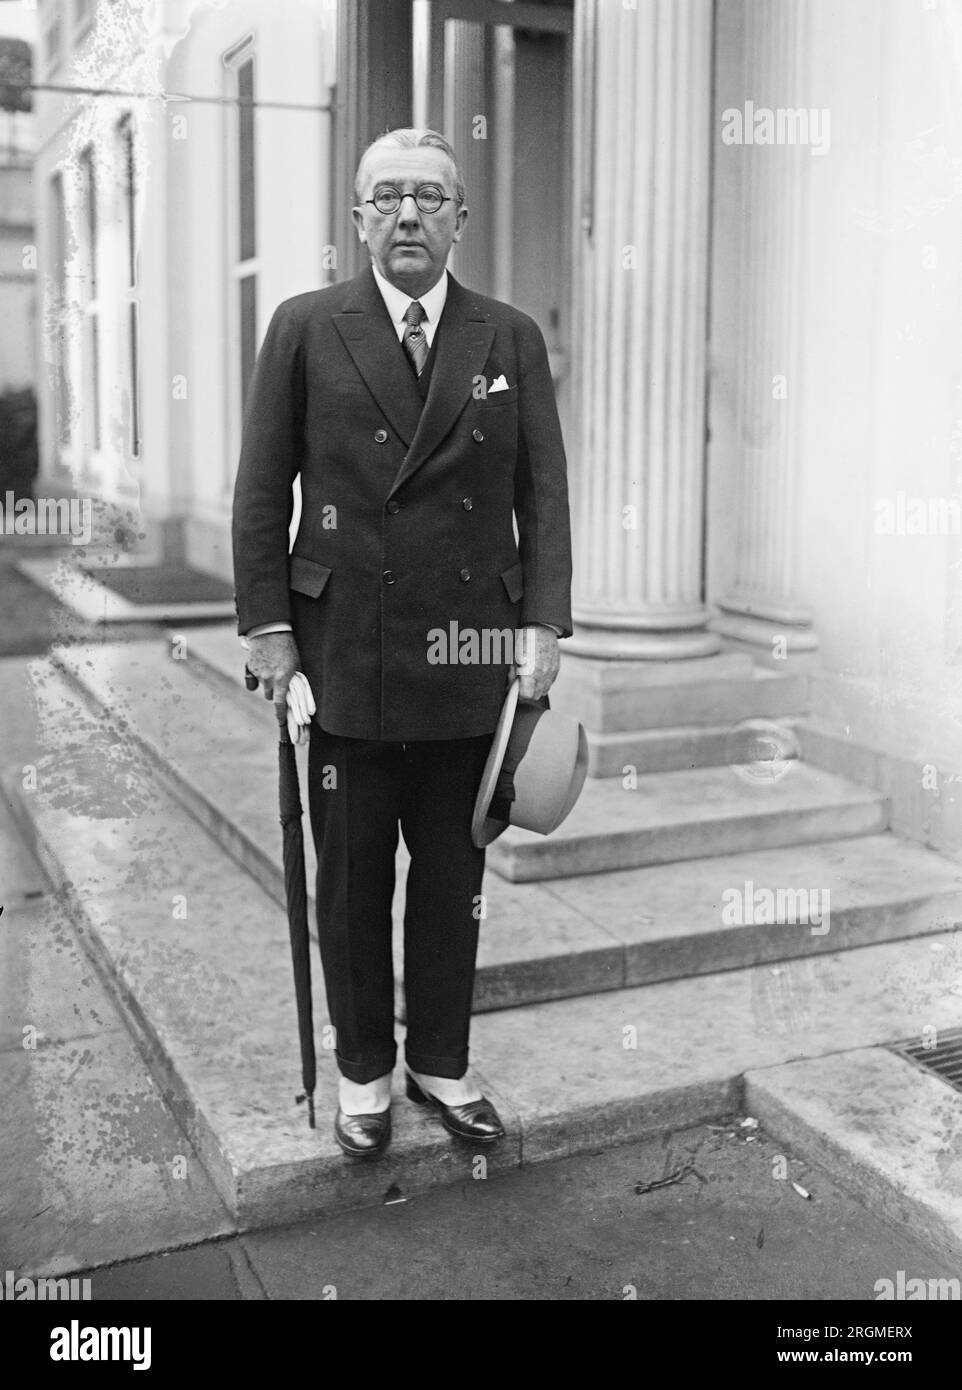 Alanson B. Houghton standing outdoors, holding an umbrella and a hat ca. 1923 Stock Photo